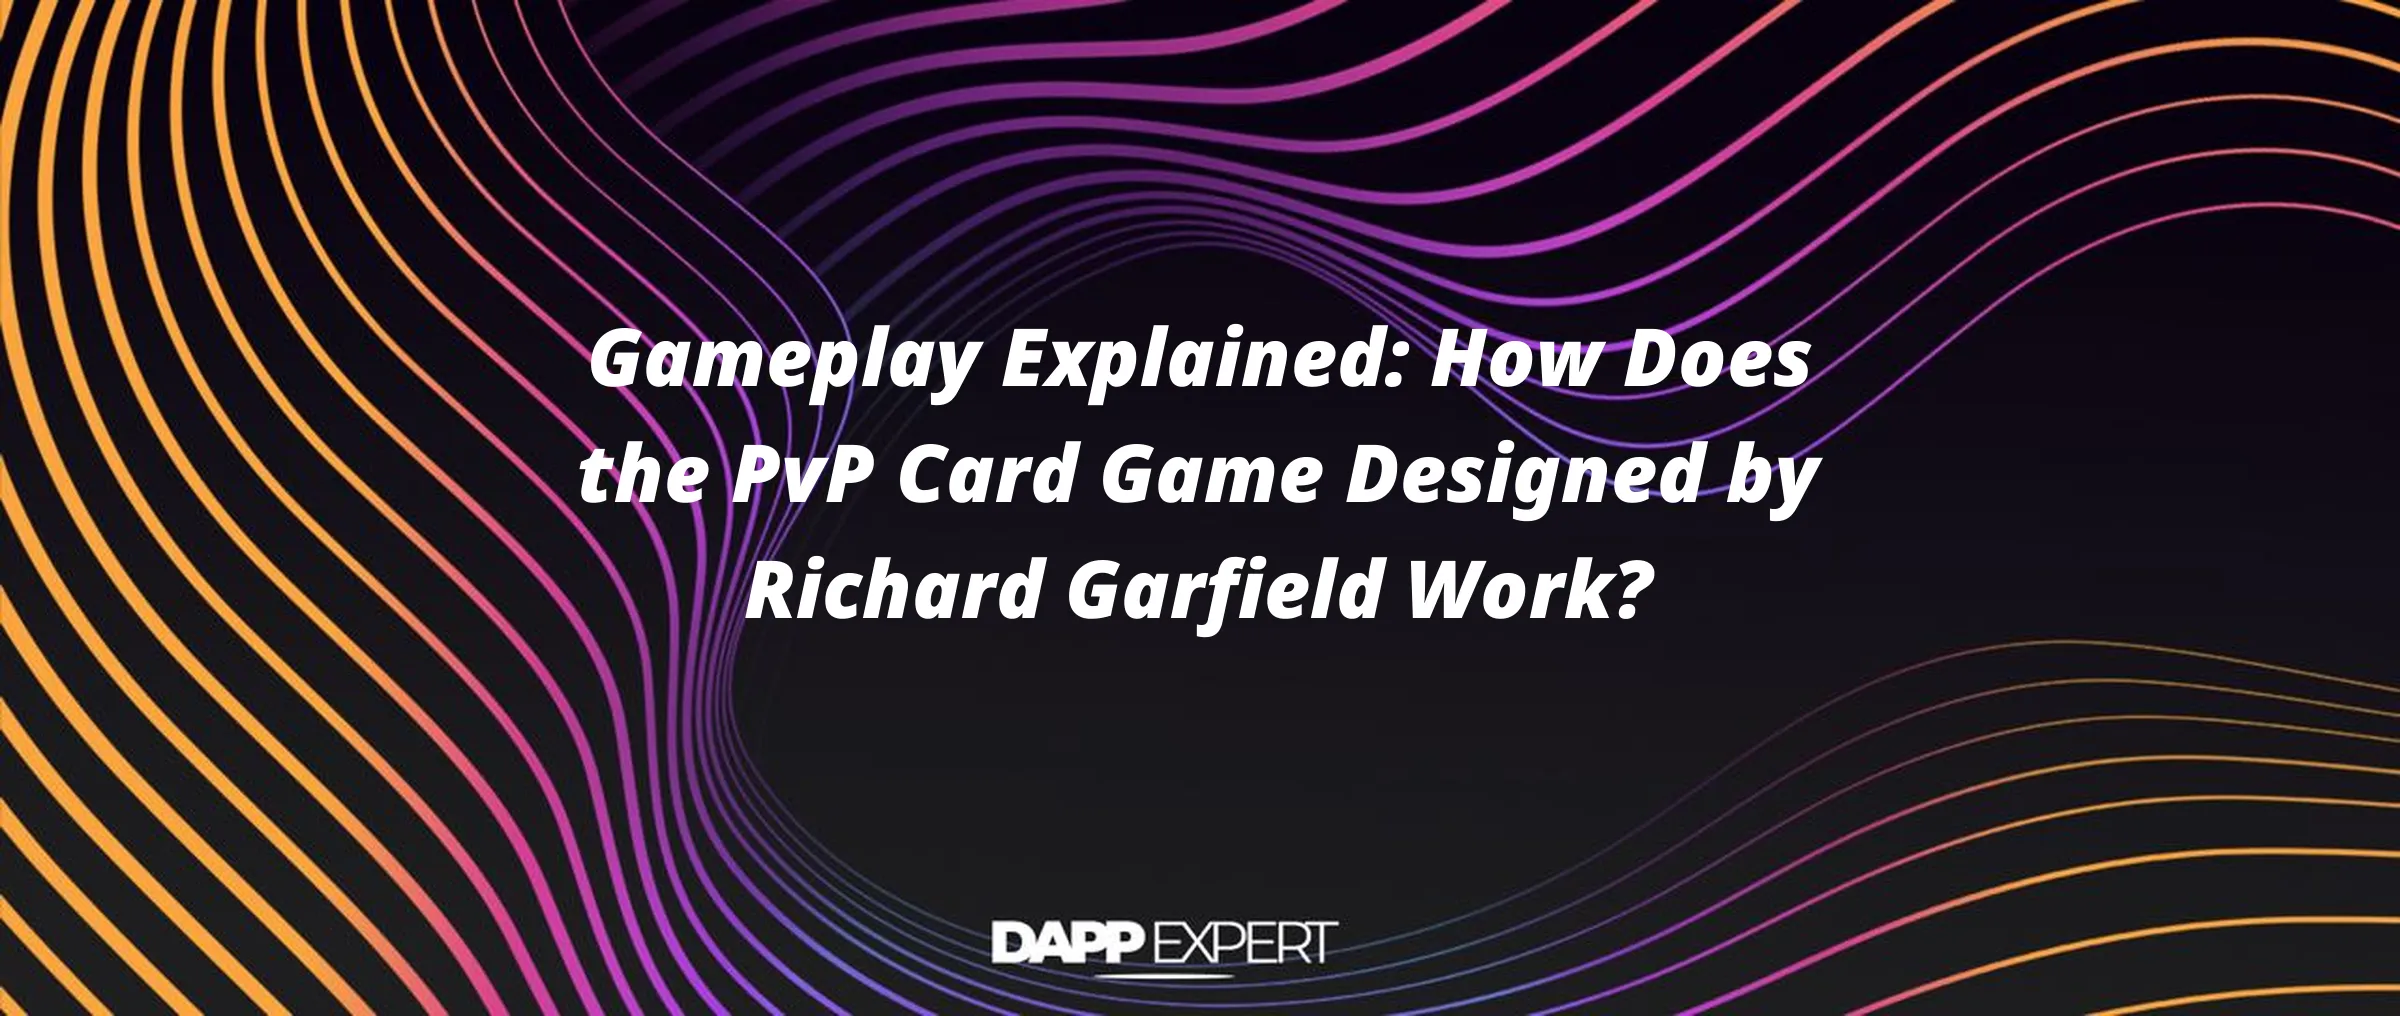 Gameplay Explained: How Does the PvP Card Game Designed by Richard Garfield Work?